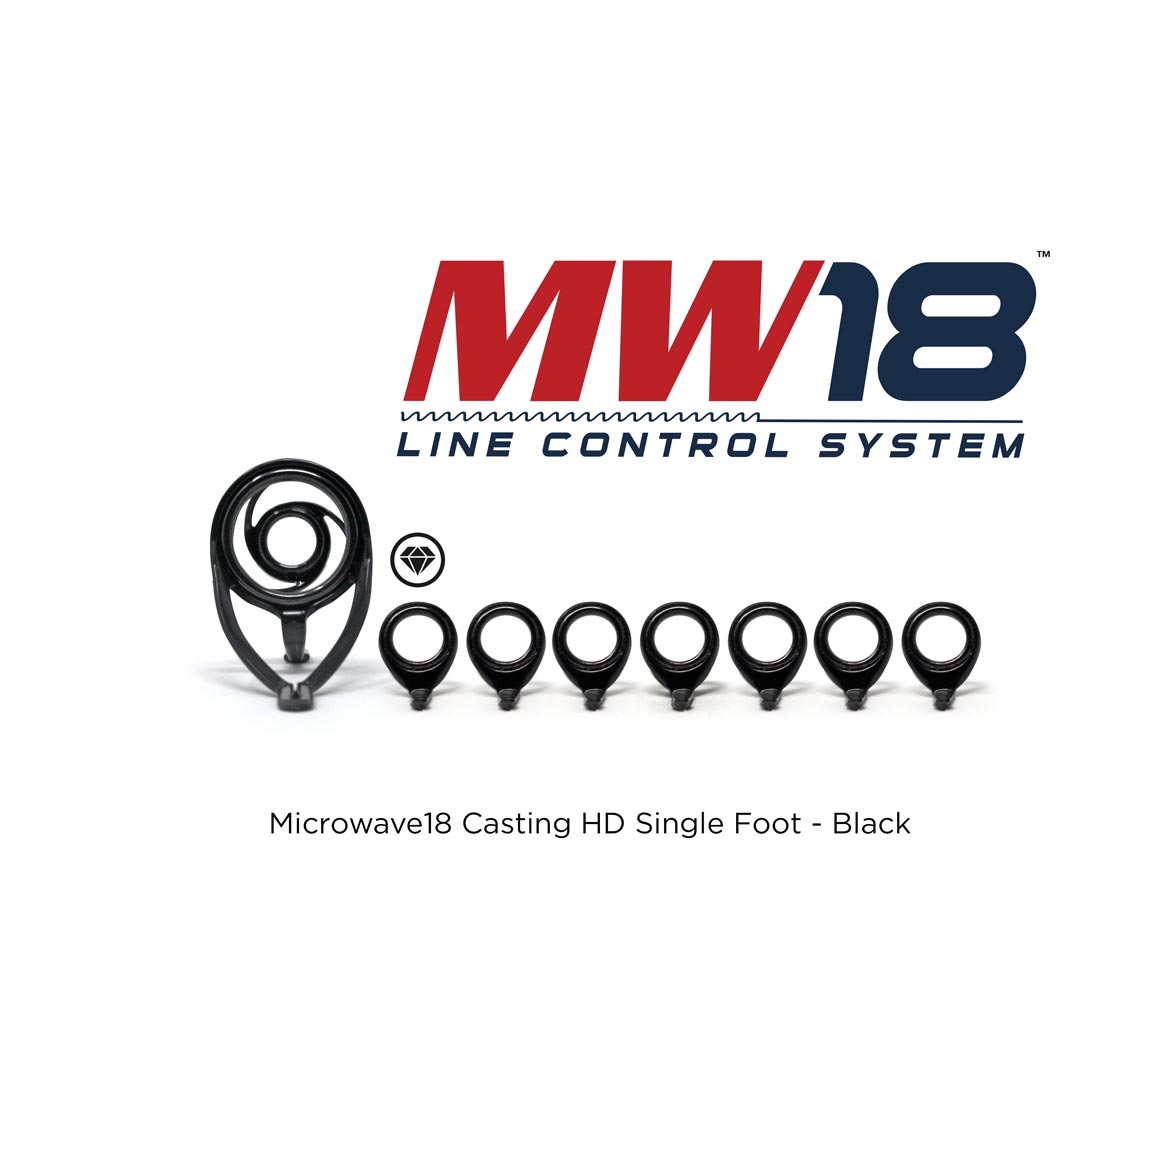 MicroWave 18 Line Control System